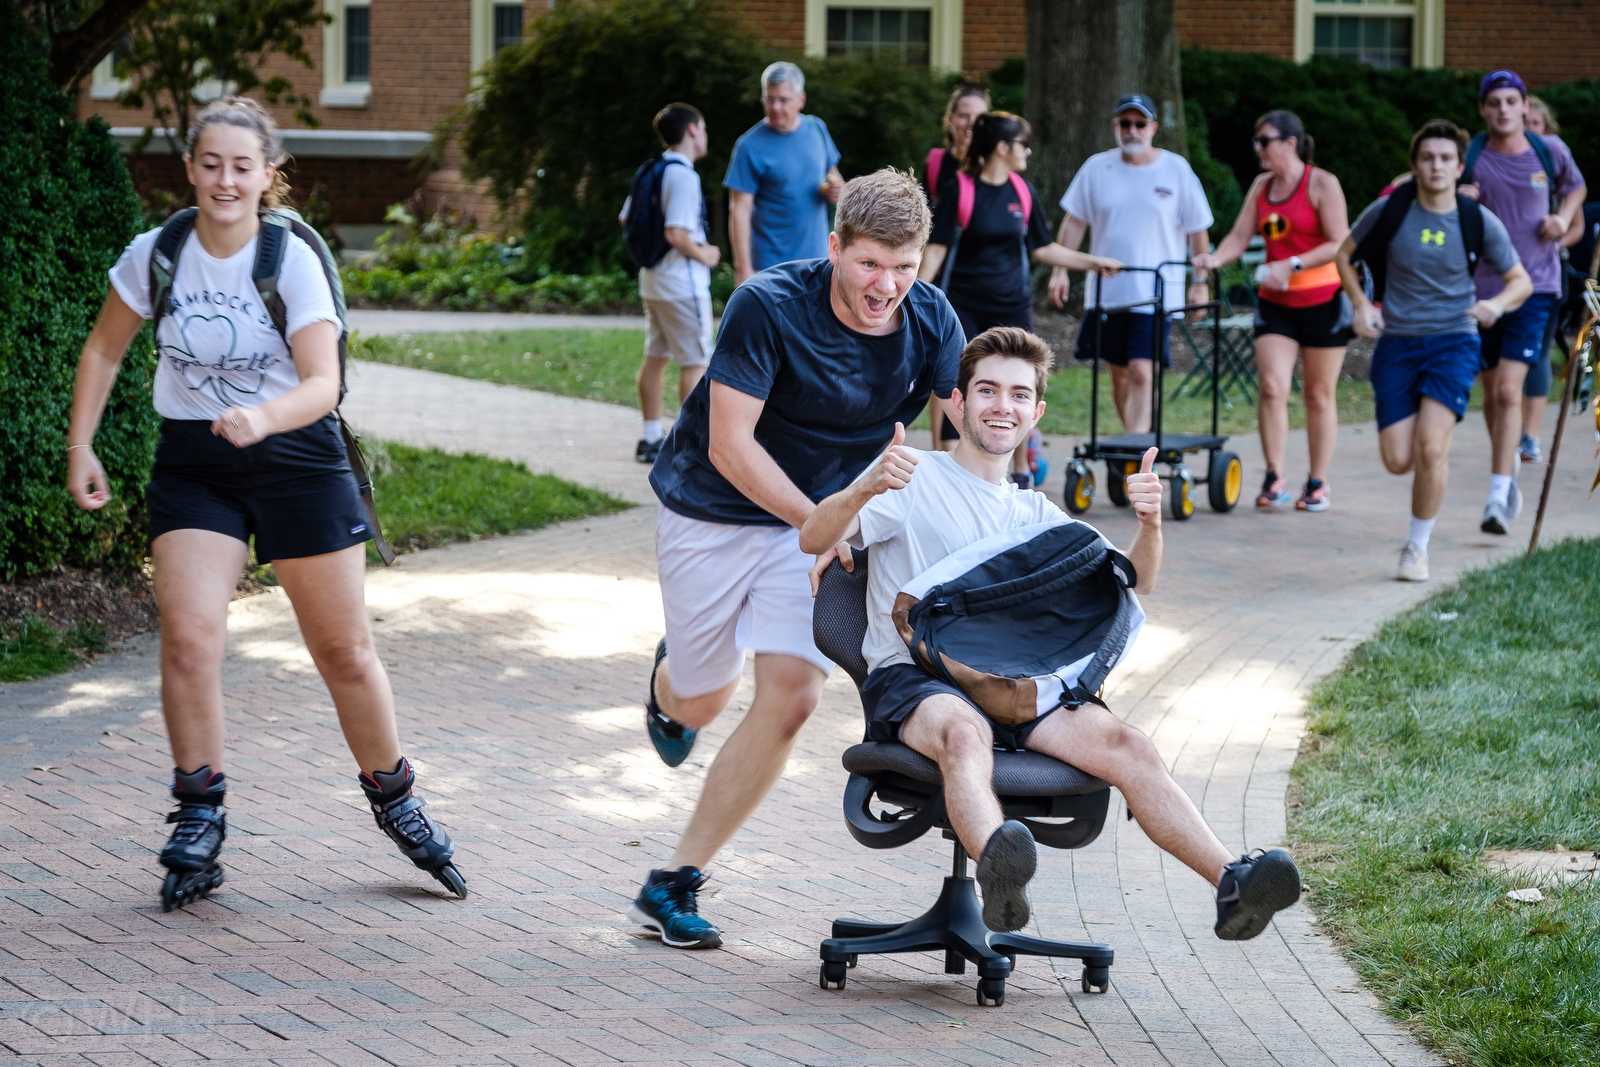 Hit the Bricks is an annual tradition at Wake Forest, raising money for cancer research.